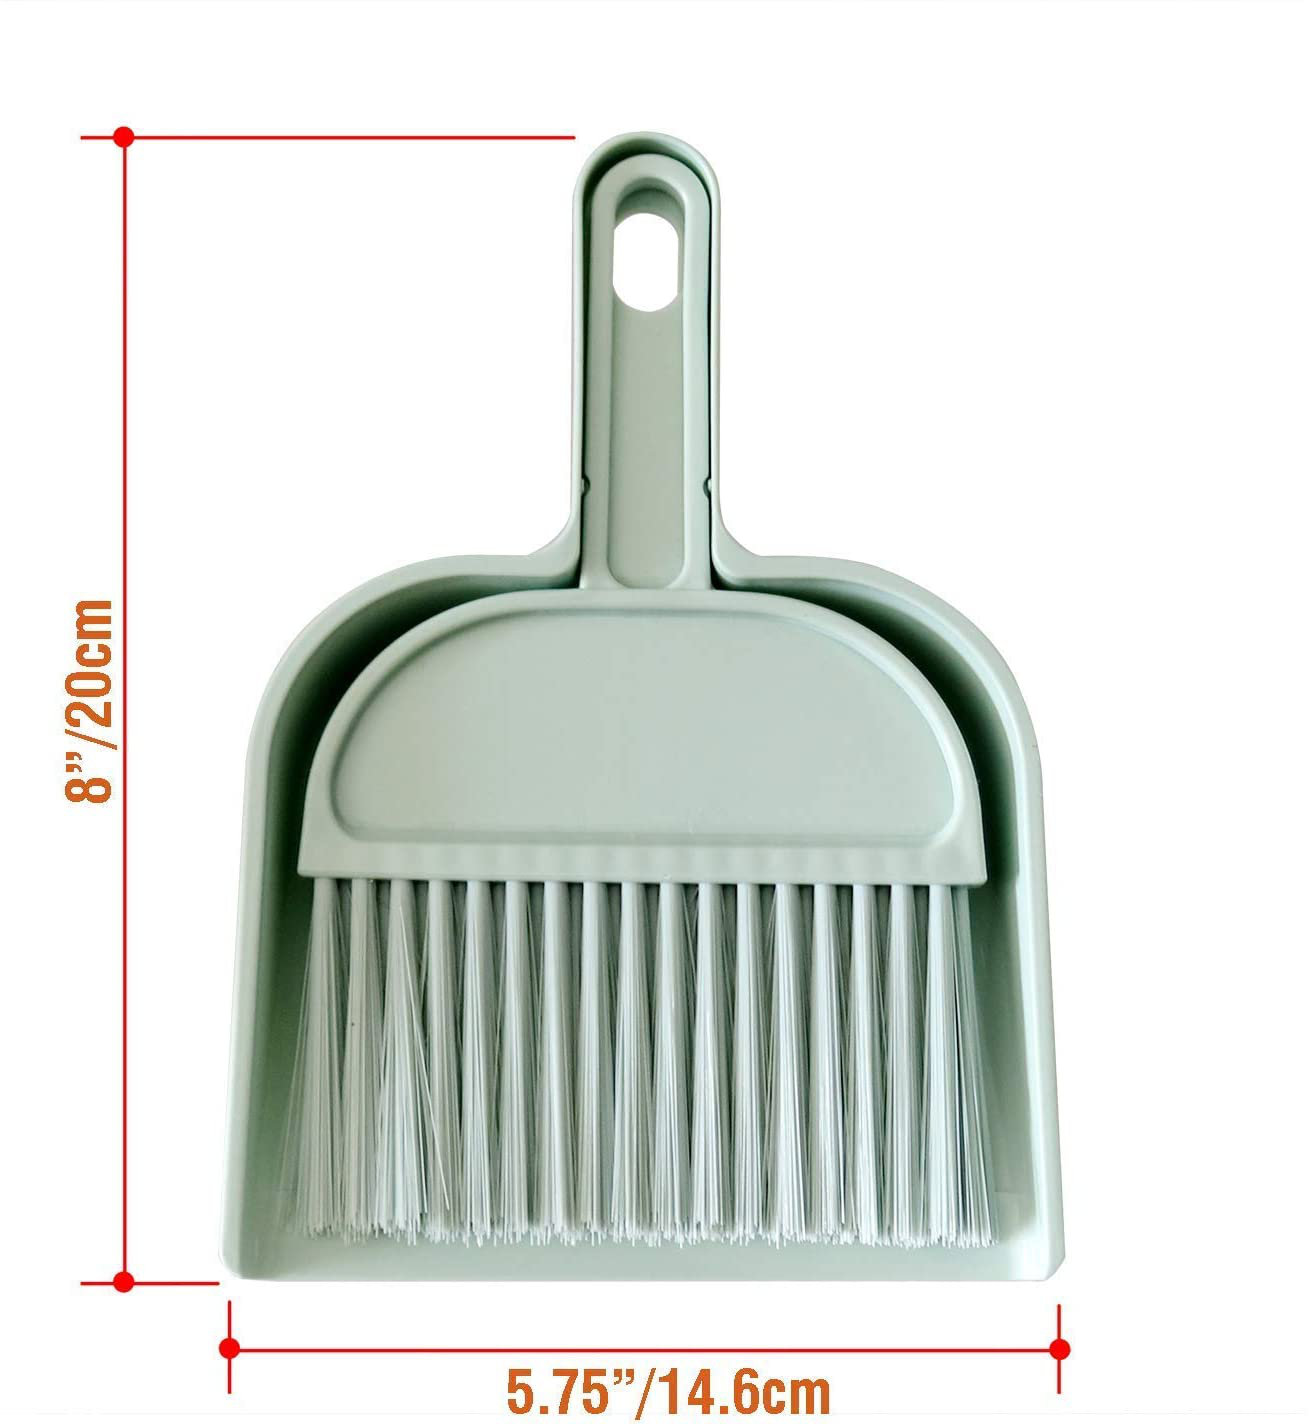 Rypet Cage Cleaner for Guinea Pigs, Hamsters, Chinchillas, Rabbits, Reptiles, Hedgehogs and Other Small Animals - Mini Dustpan and Brush Set Cleaning Tool for Animal Waste (1 Pack)